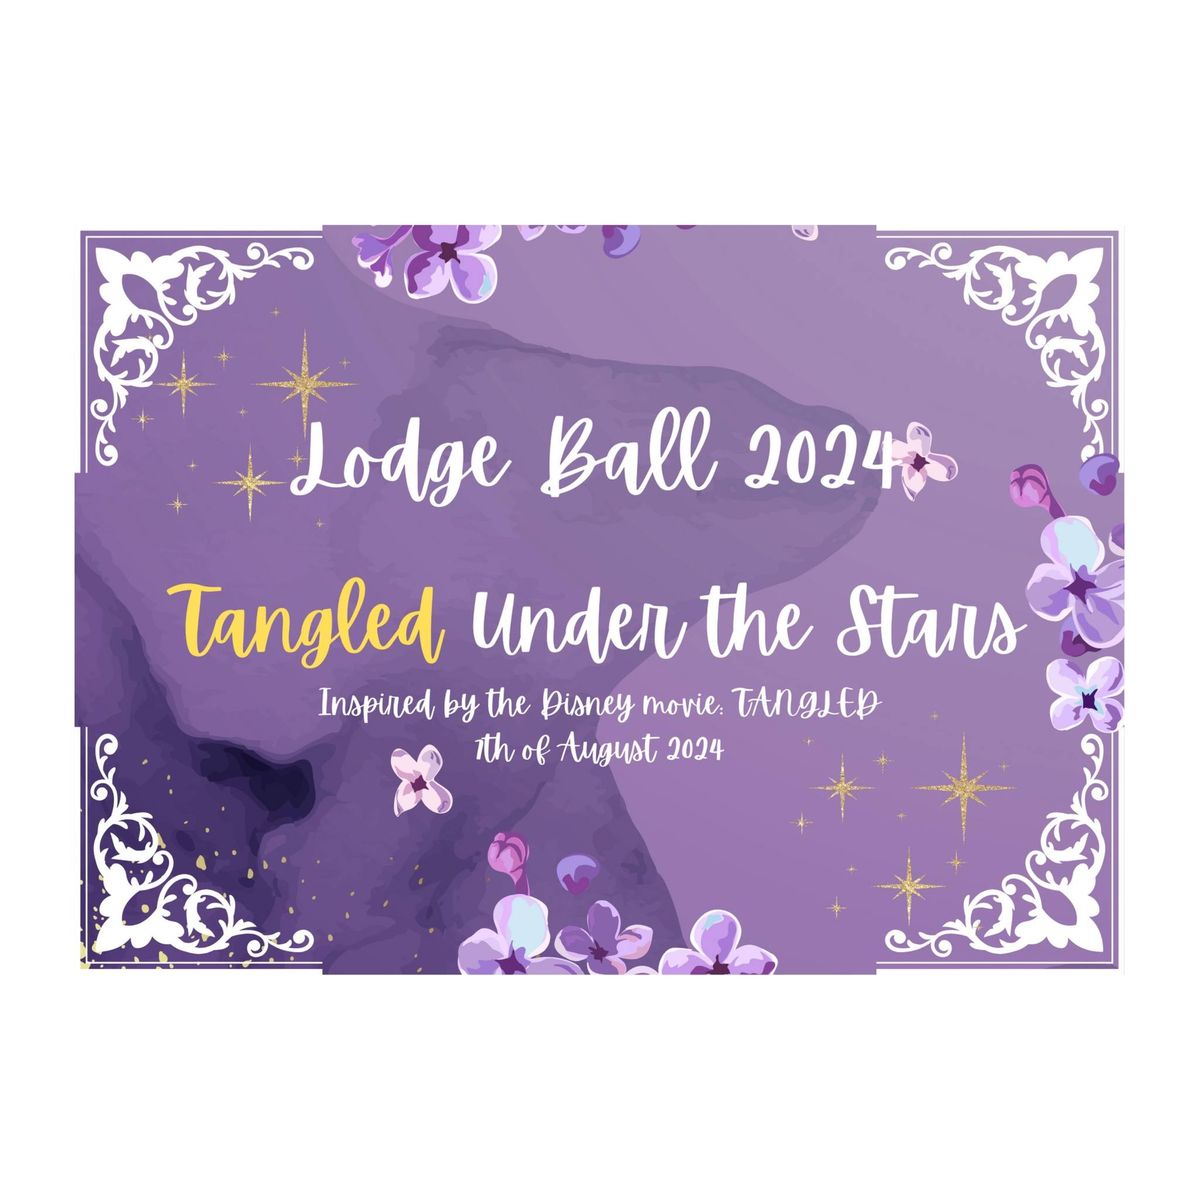 Lodge Ball 2024: Tangled Under the Stars